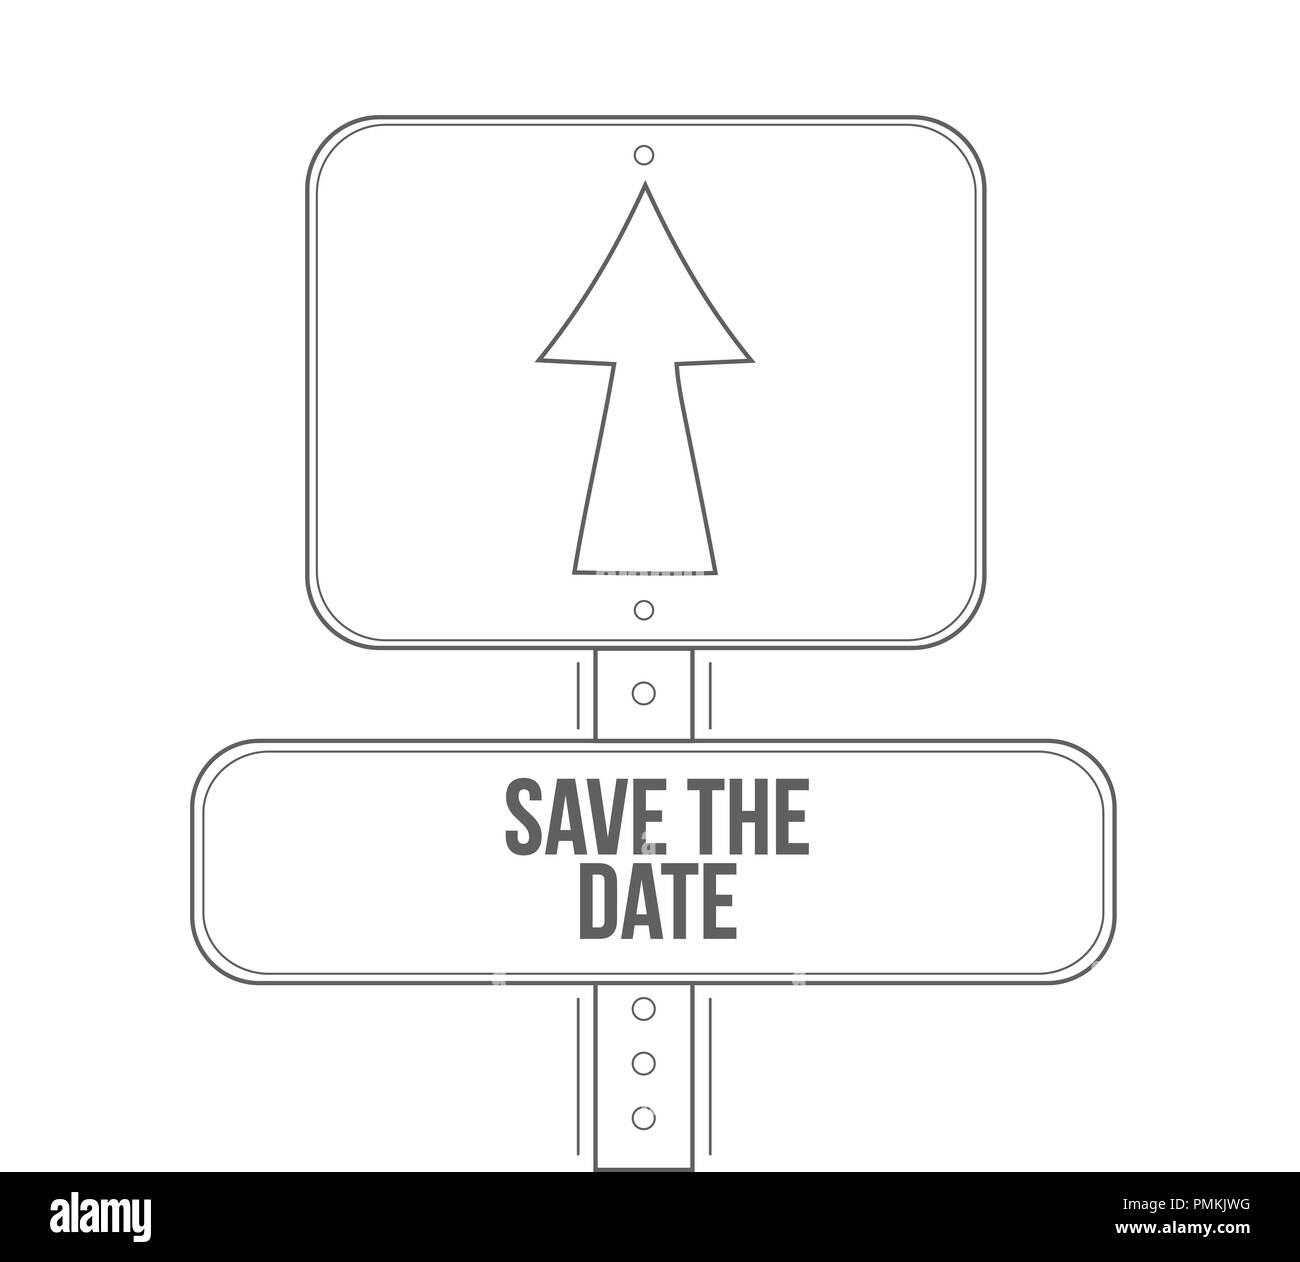 save the date line street sign isolated over a white background Stock Photo